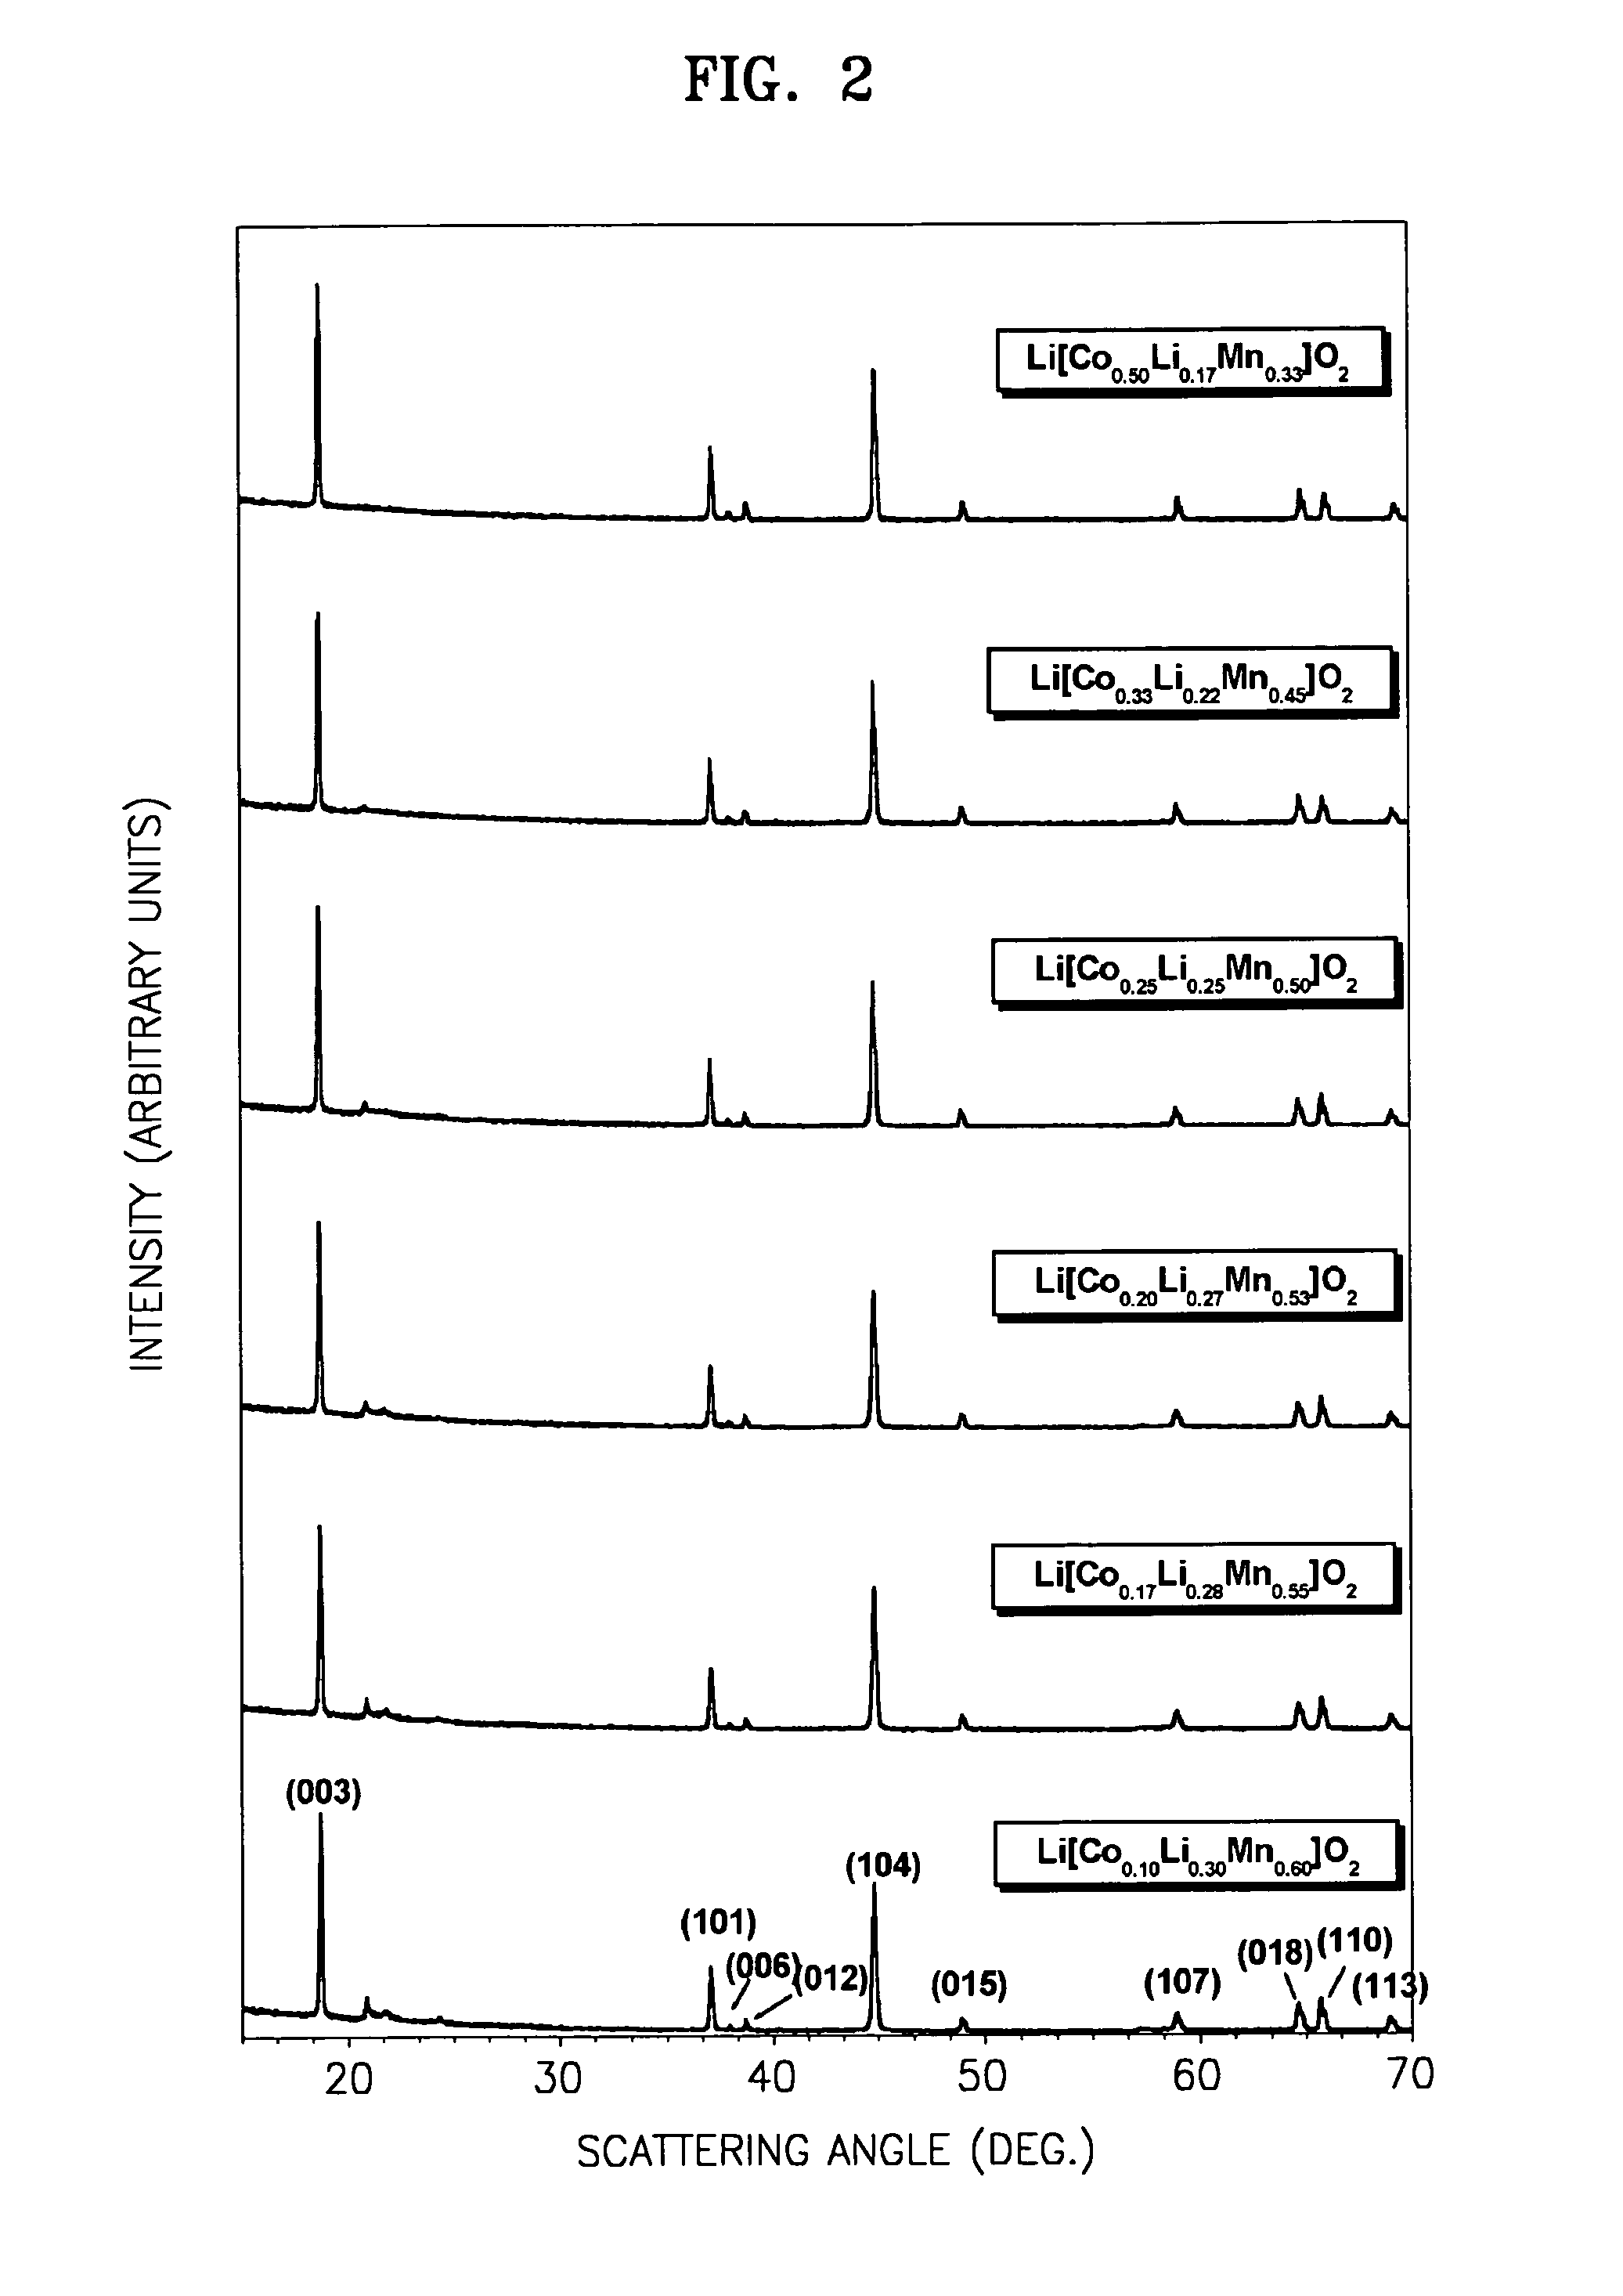 Li-Co-Mn oxide as cathode material for lithium batteries and method of synthesis of the same